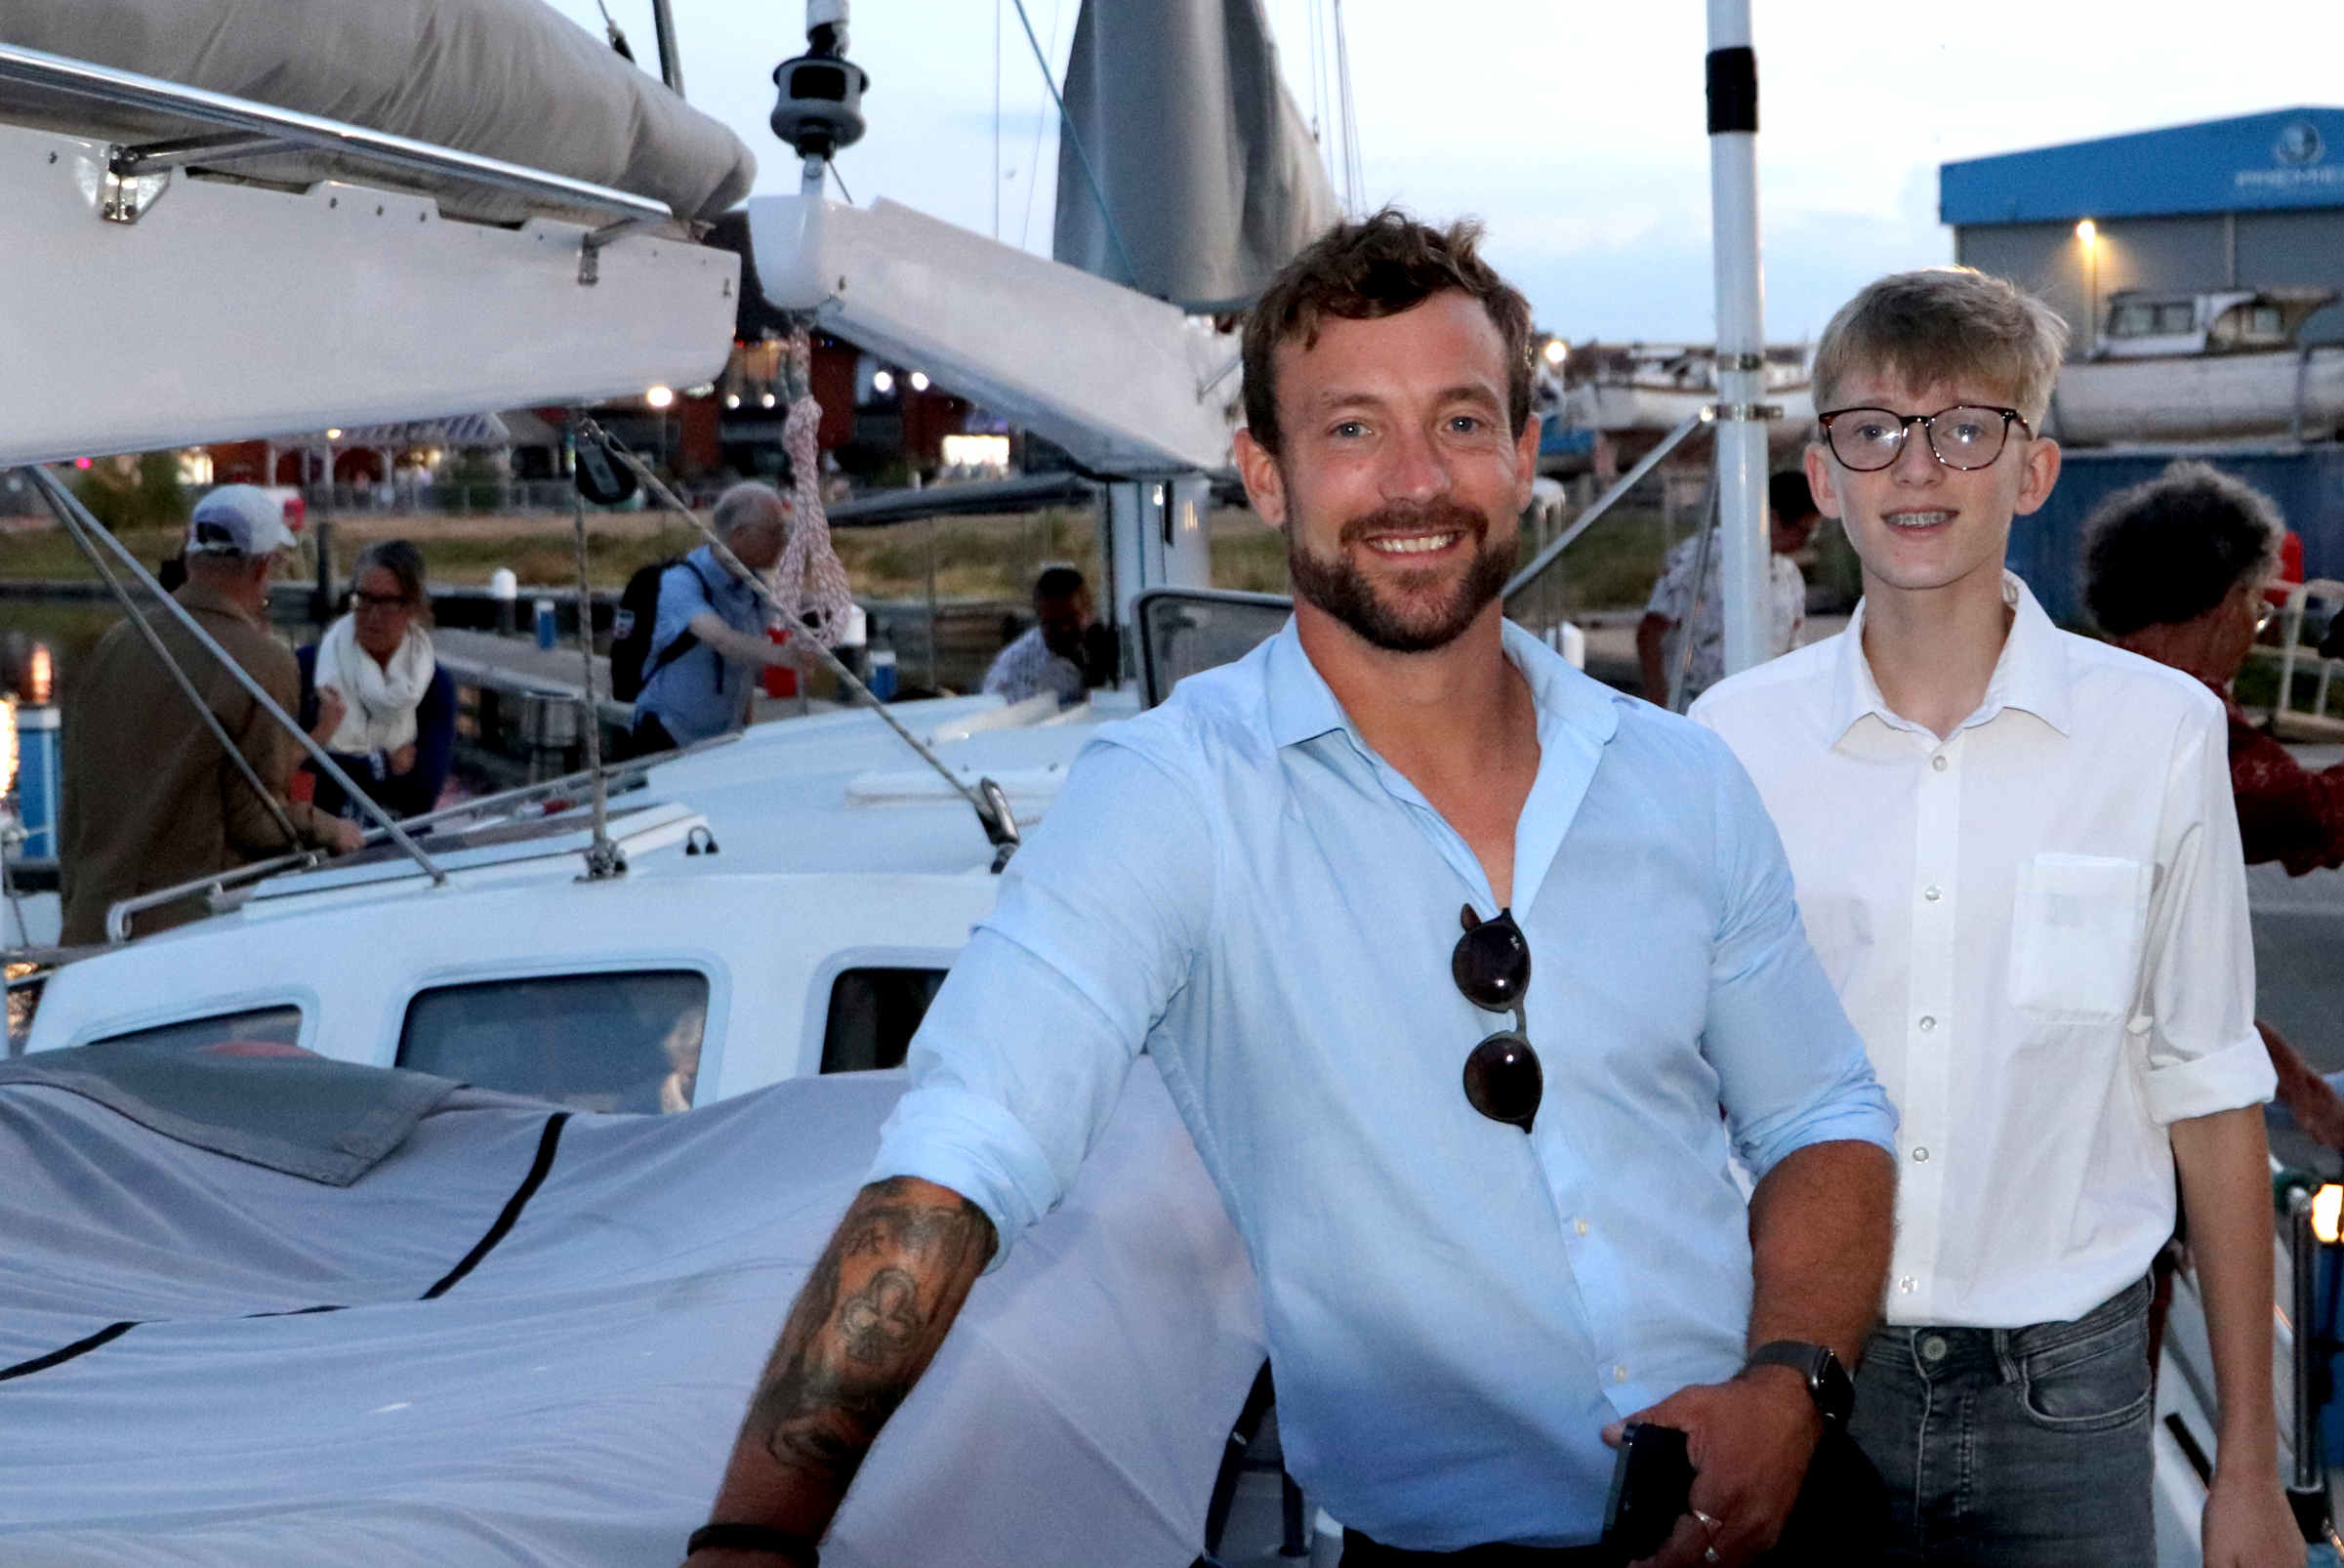 John Storm and Dan Hawk at the Sovereign Harbour Yacht Club in September 2020